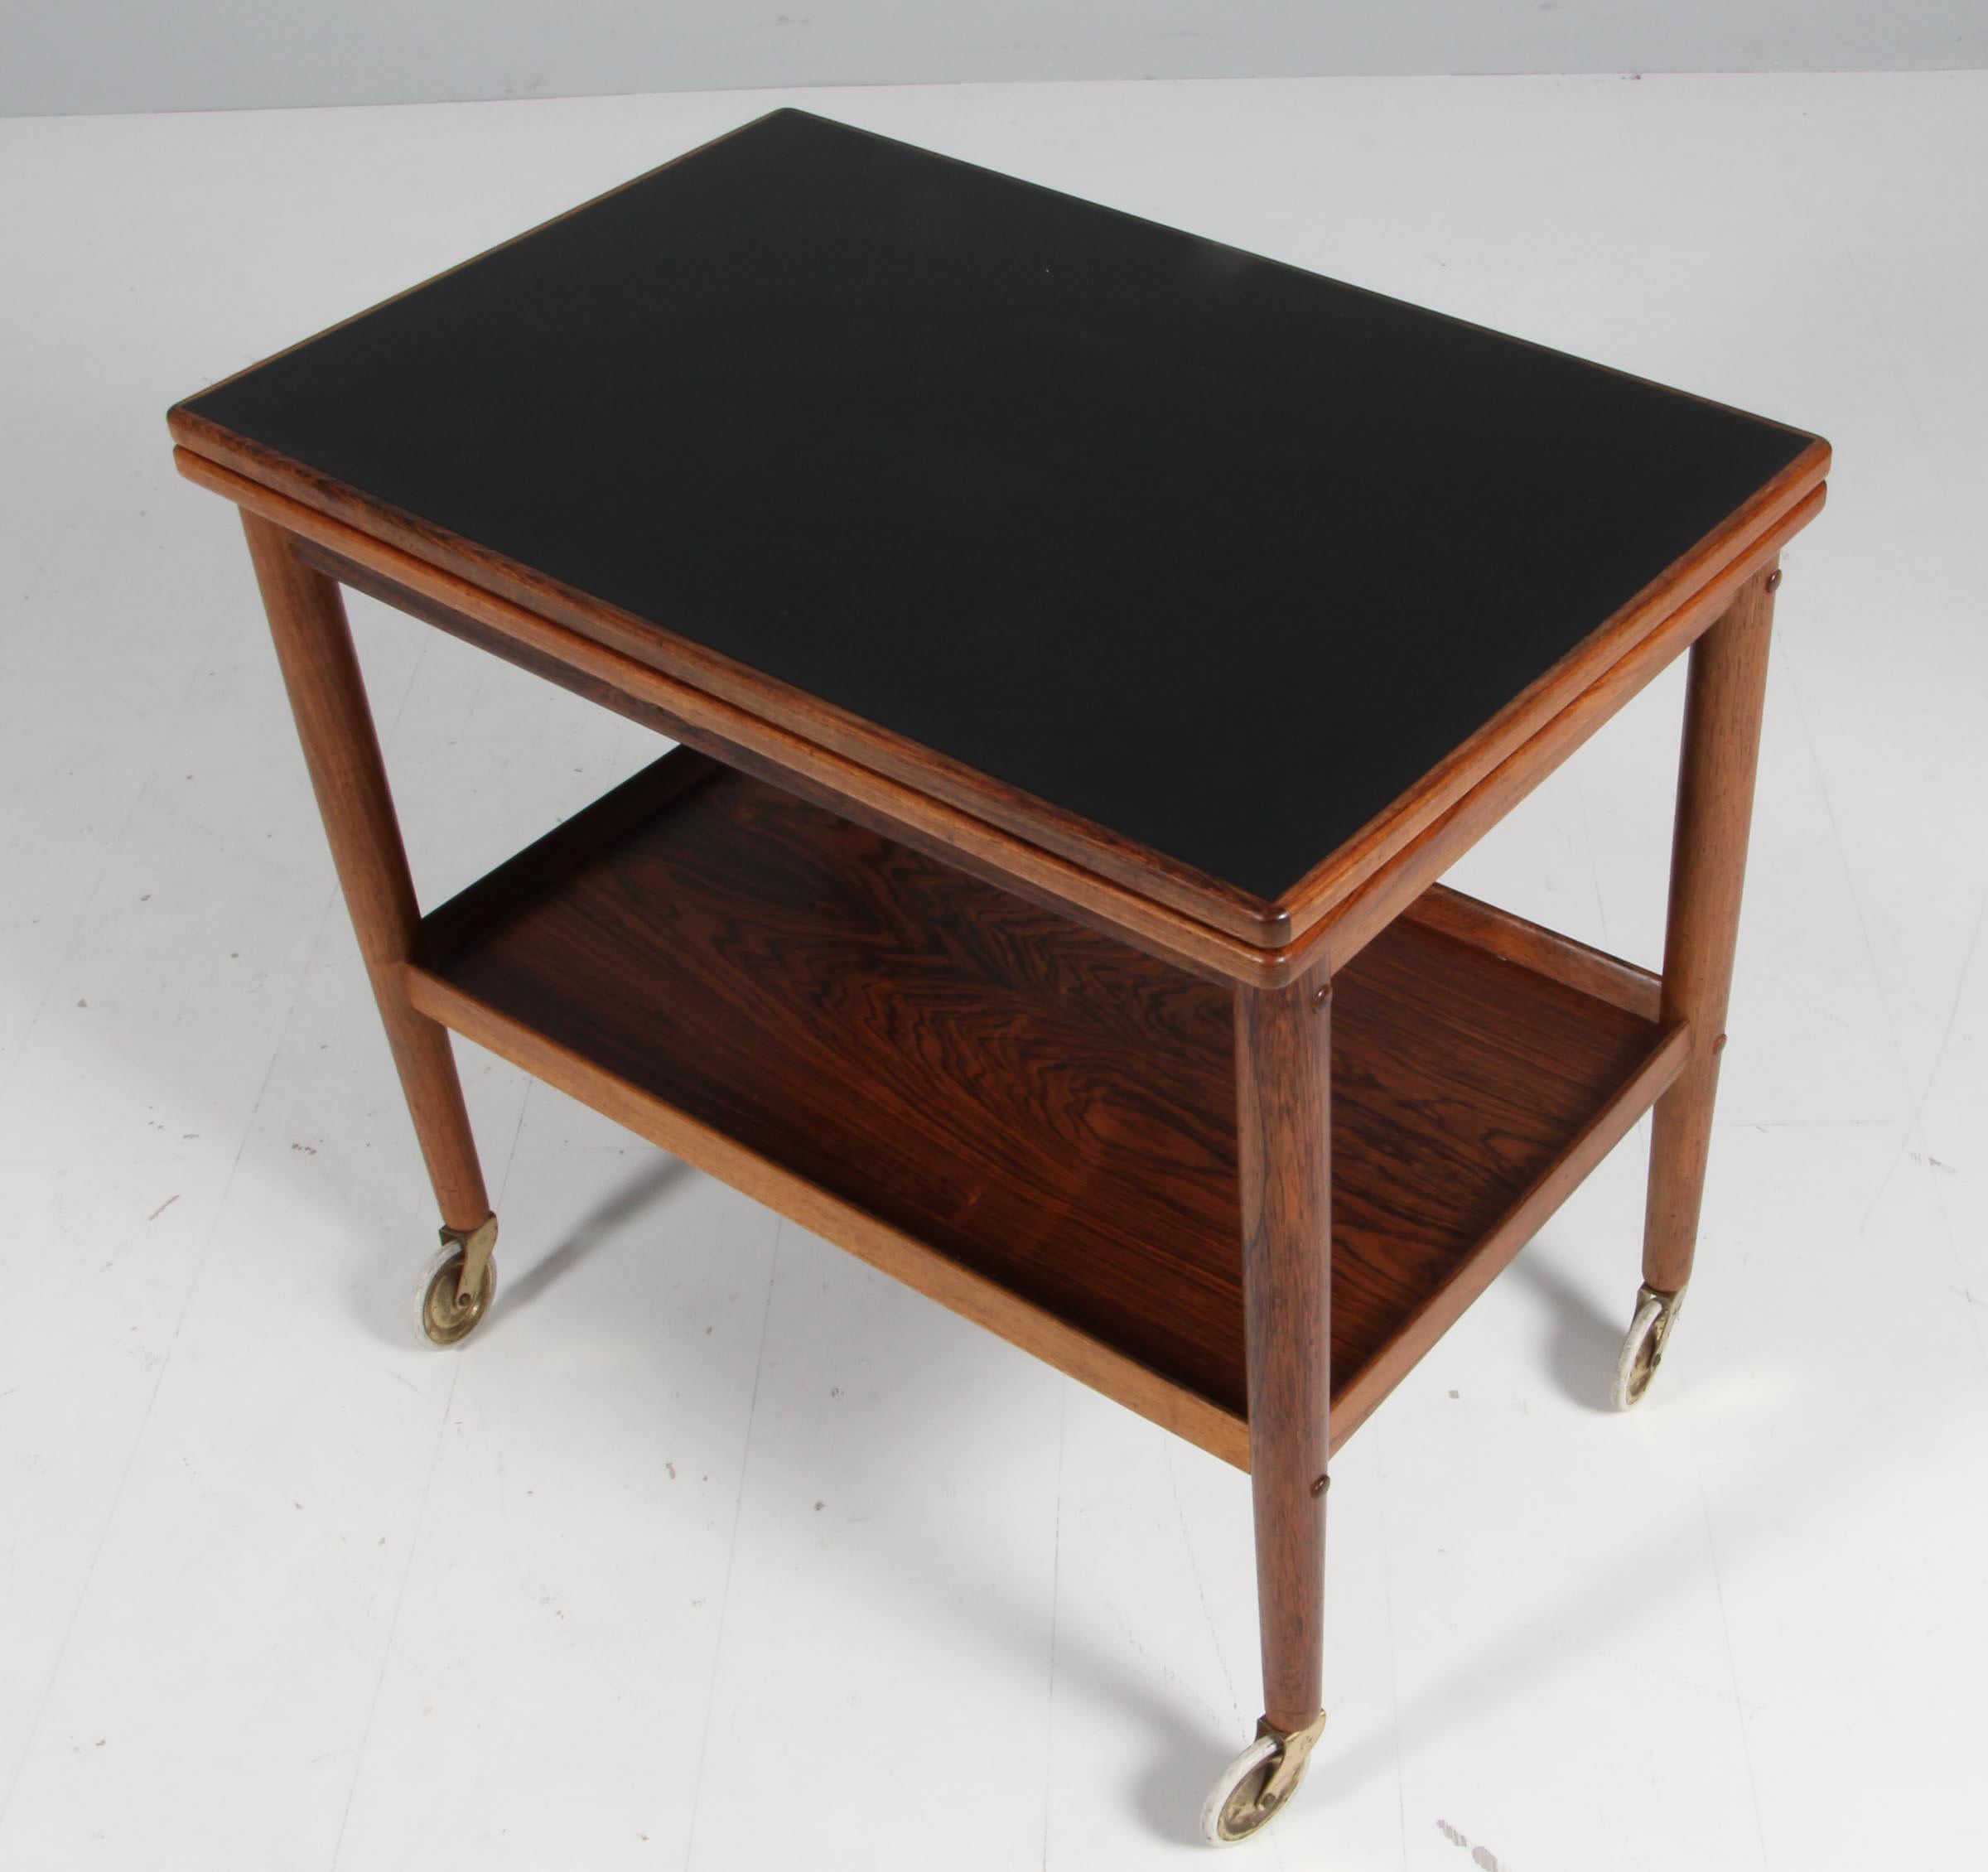 Ole Wanscher bar cart / tray cart with frame of rosewood. Foldable top with a width of 45/90 cm. With formica top.

Model Rungstedlund, made by Poul Jeppesen.

